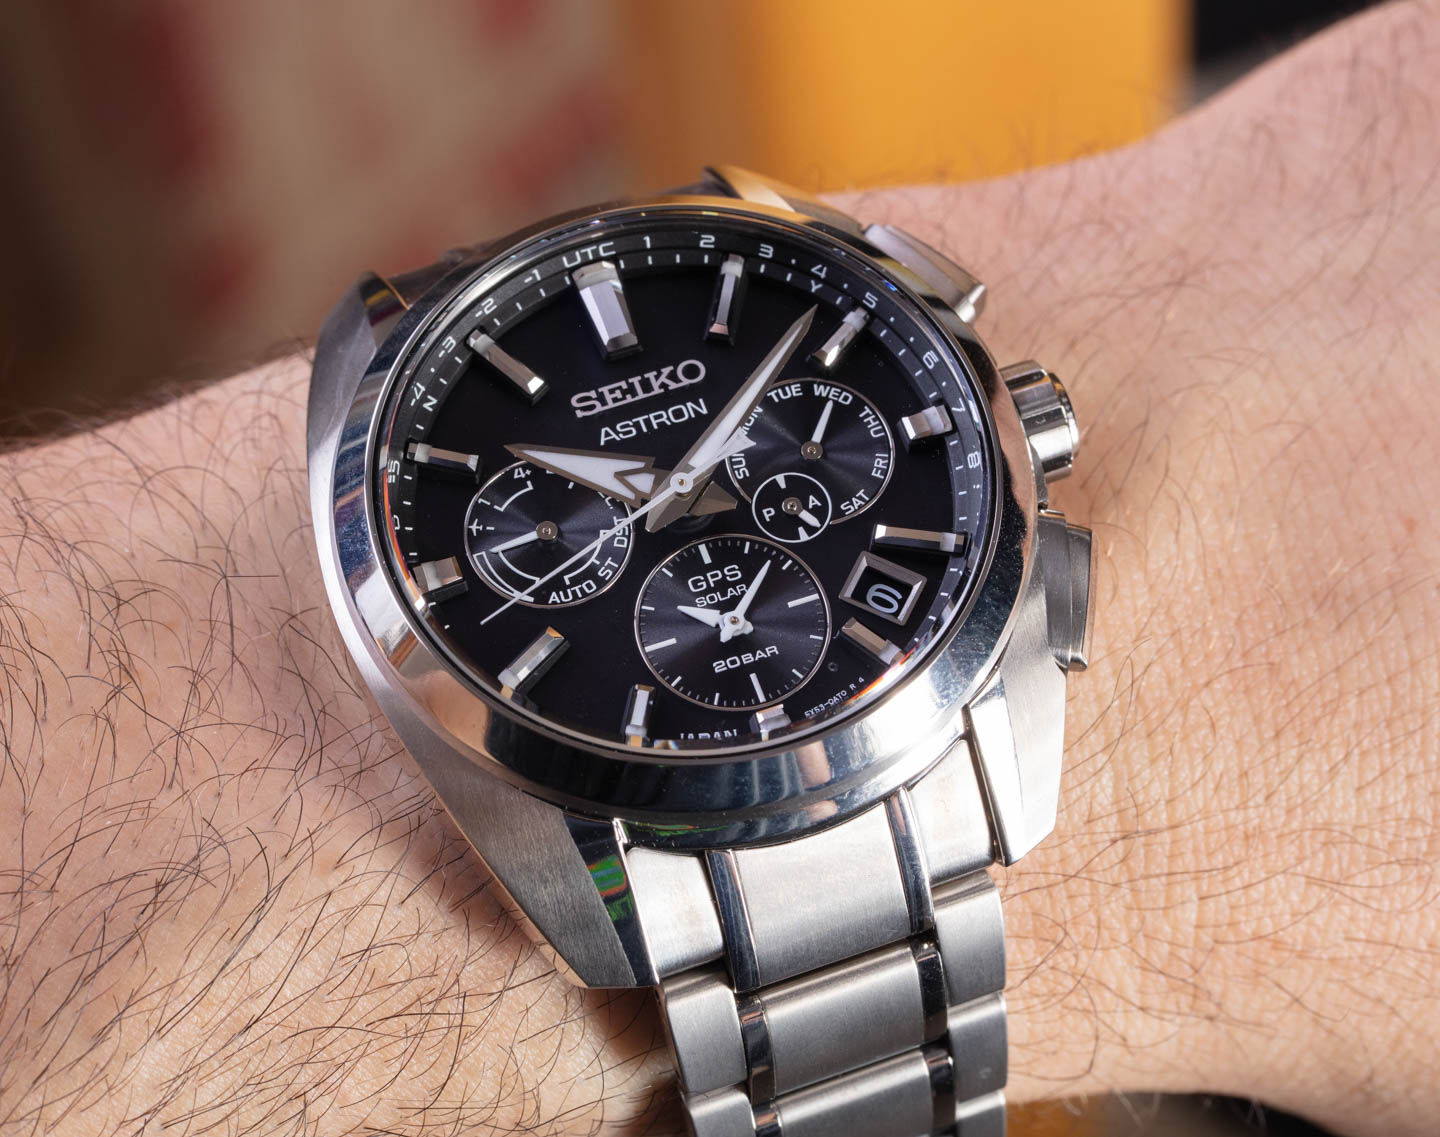 Seiko Astron SBXY029 Solar Radio Wave Watch with 1 year warranty for  Rs.50,067 for sale from a Seller on Chrono24